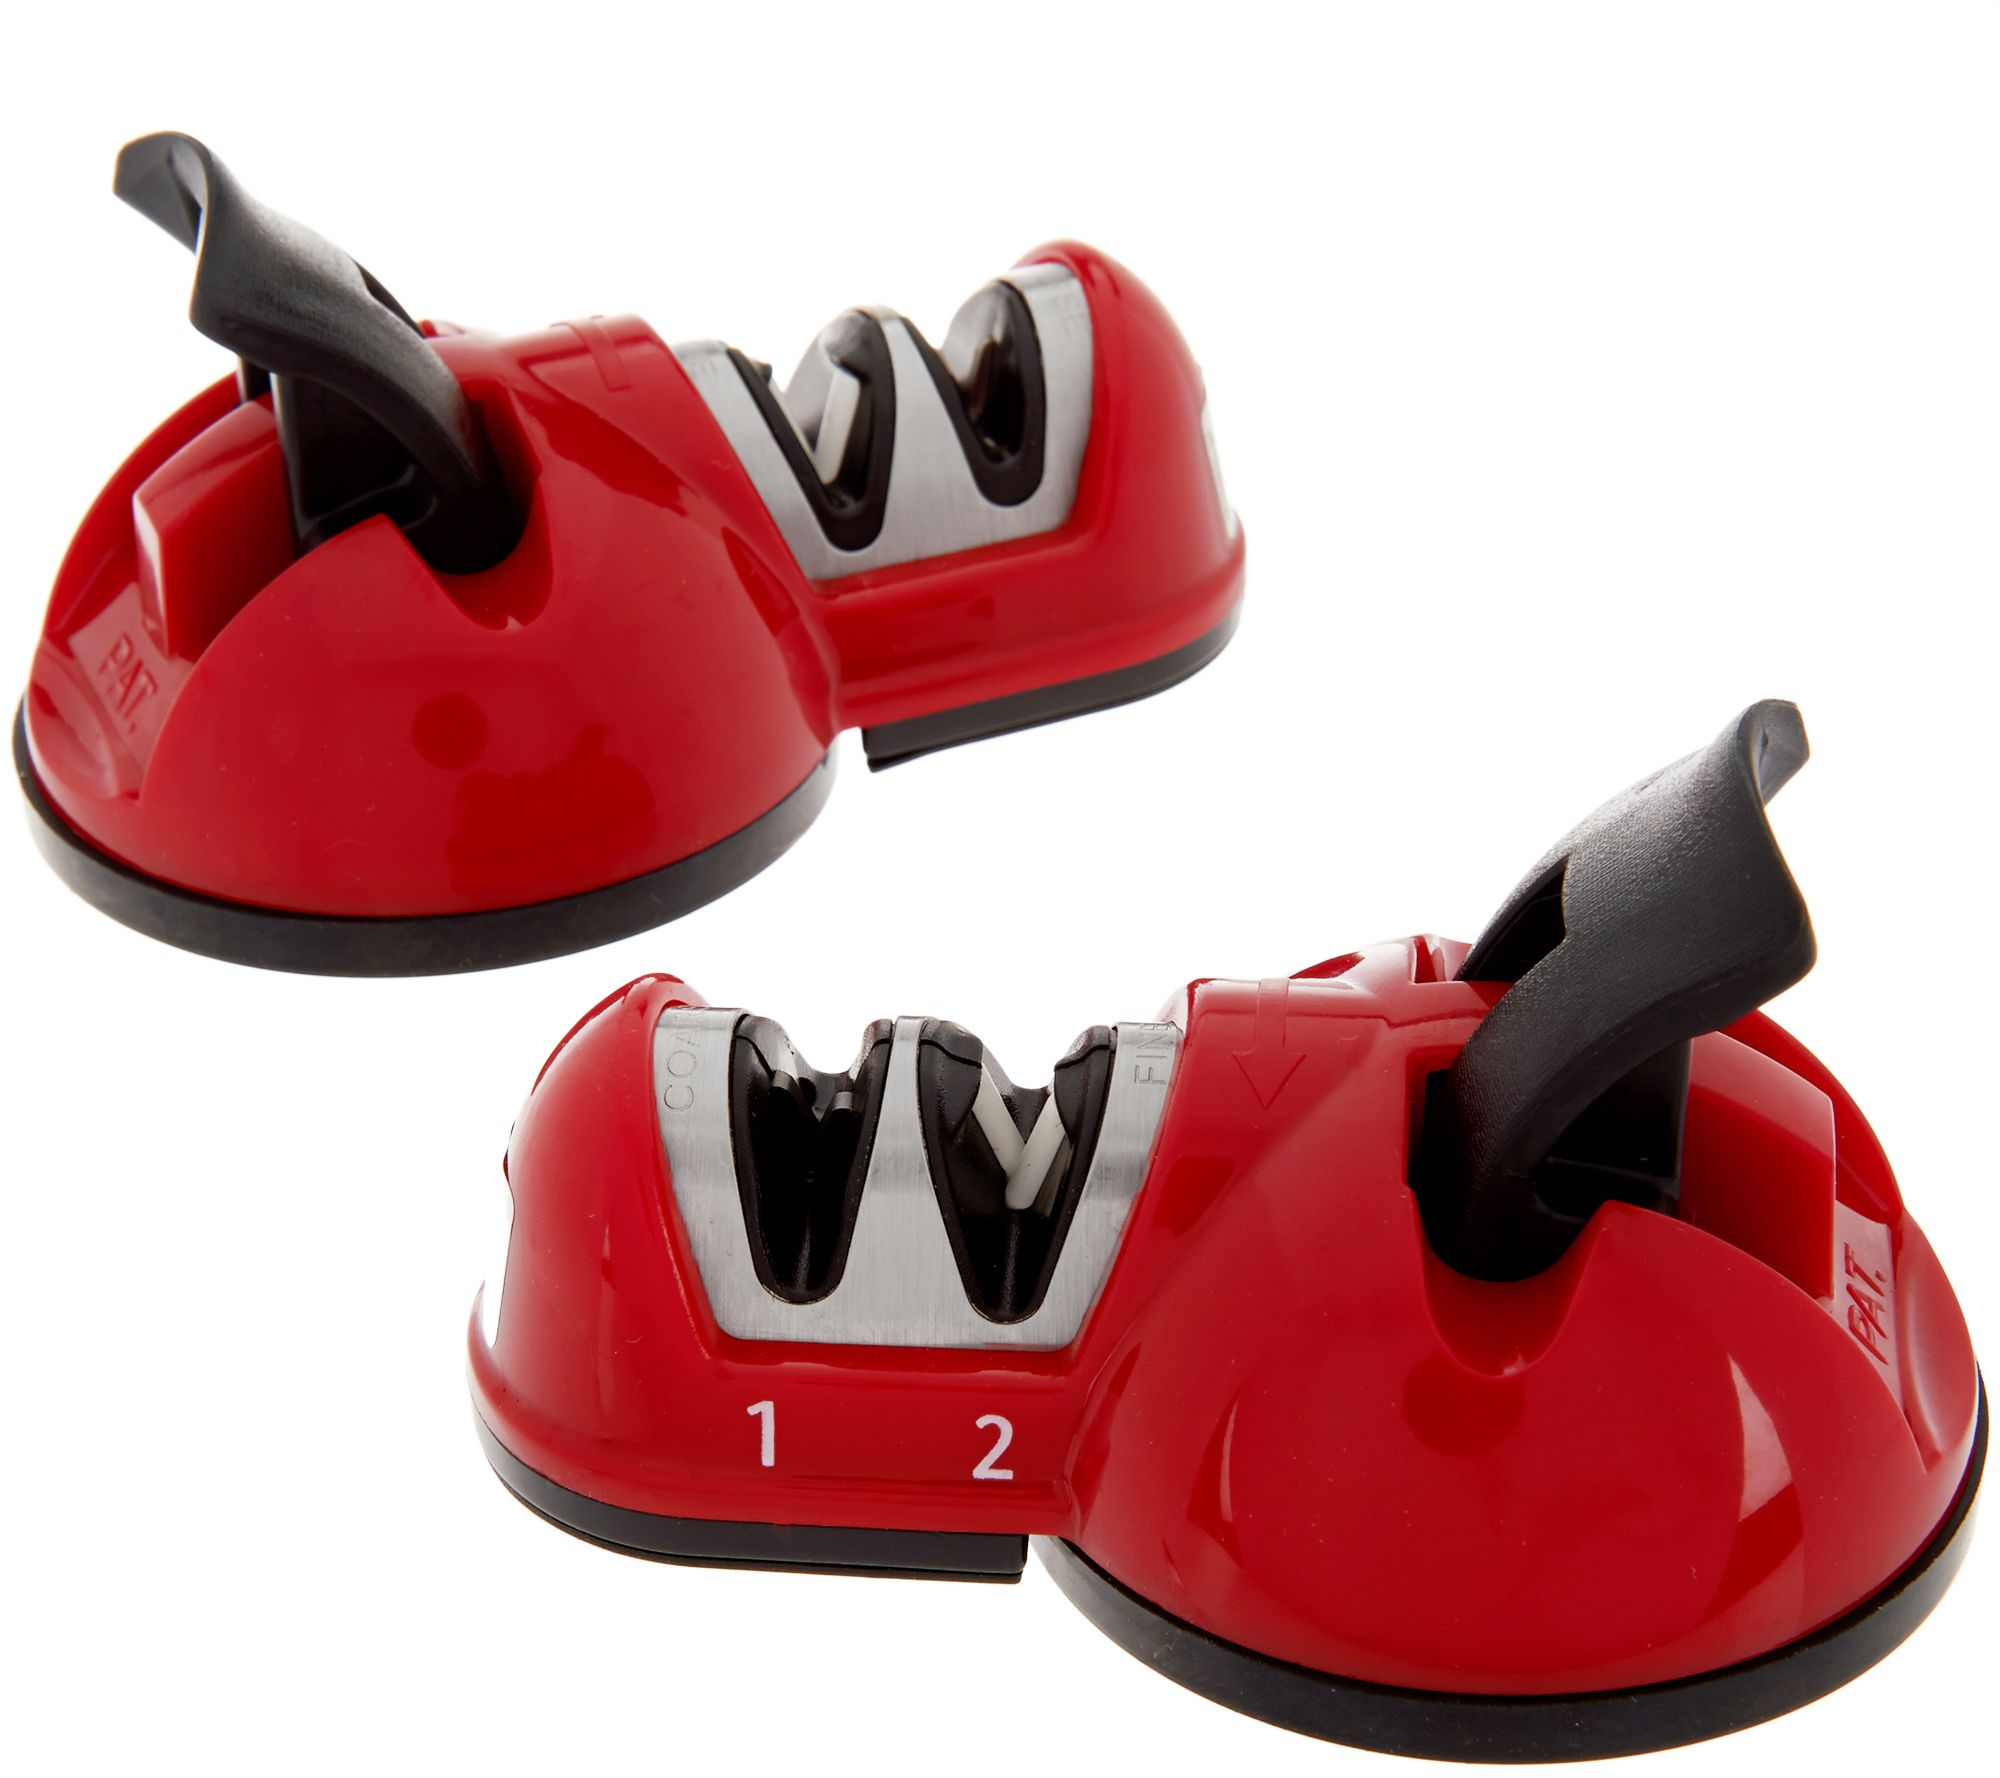 Böker Two-stage Suction Cup Roller Sharpener